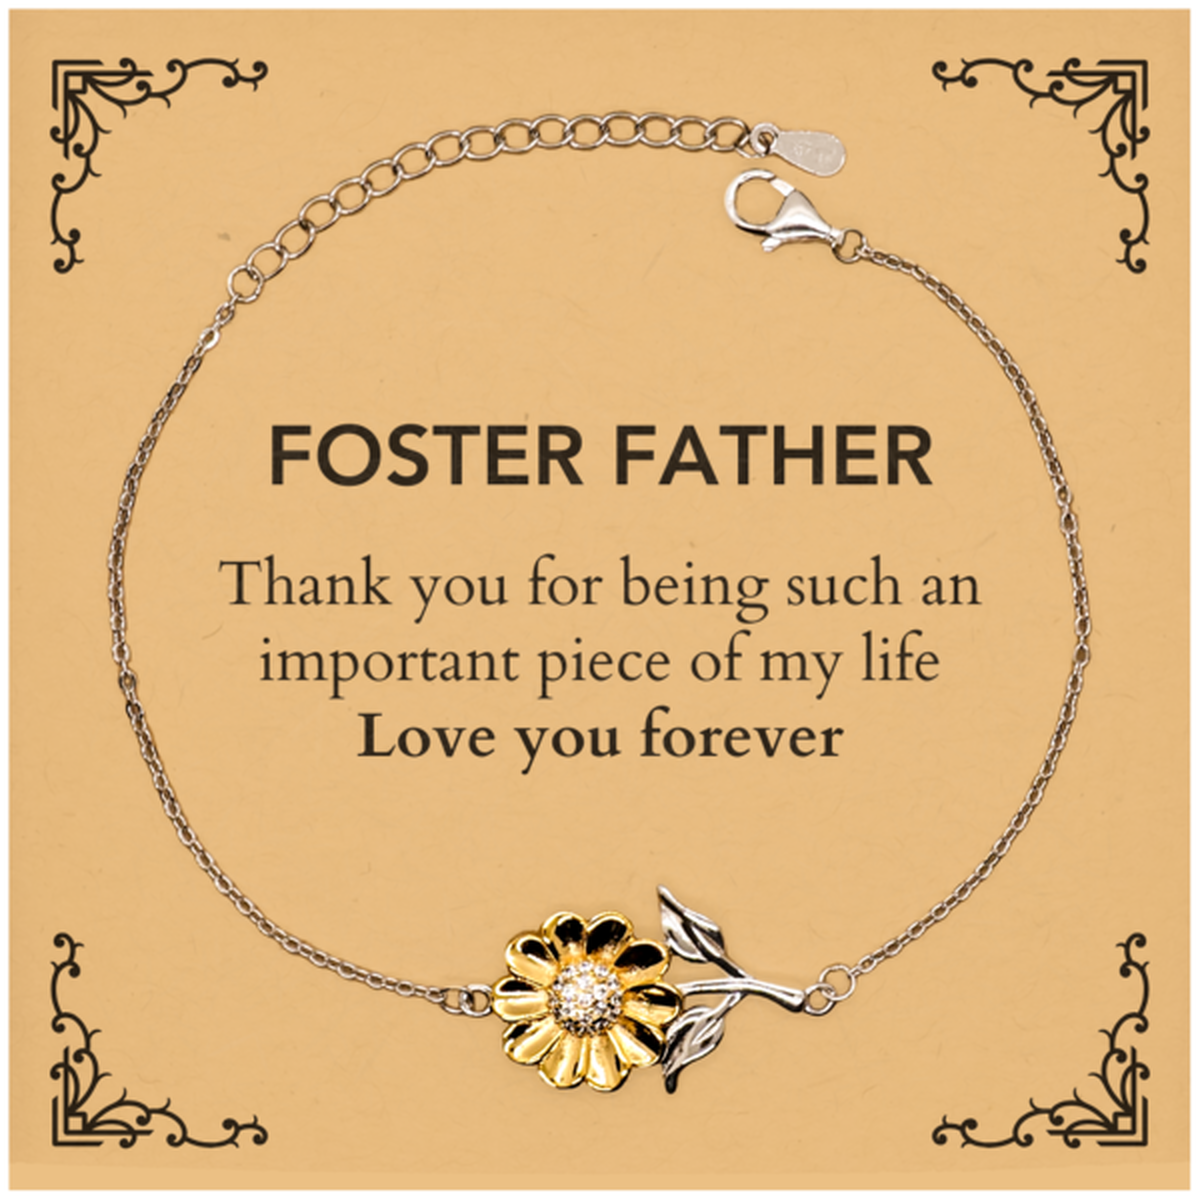 Appropriate Foster Father Sunflower Bracelet Epic Birthday Gifts for Foster Father Thank you for being such an important piece of my life Foster Father Christmas Mothers Fathers Day